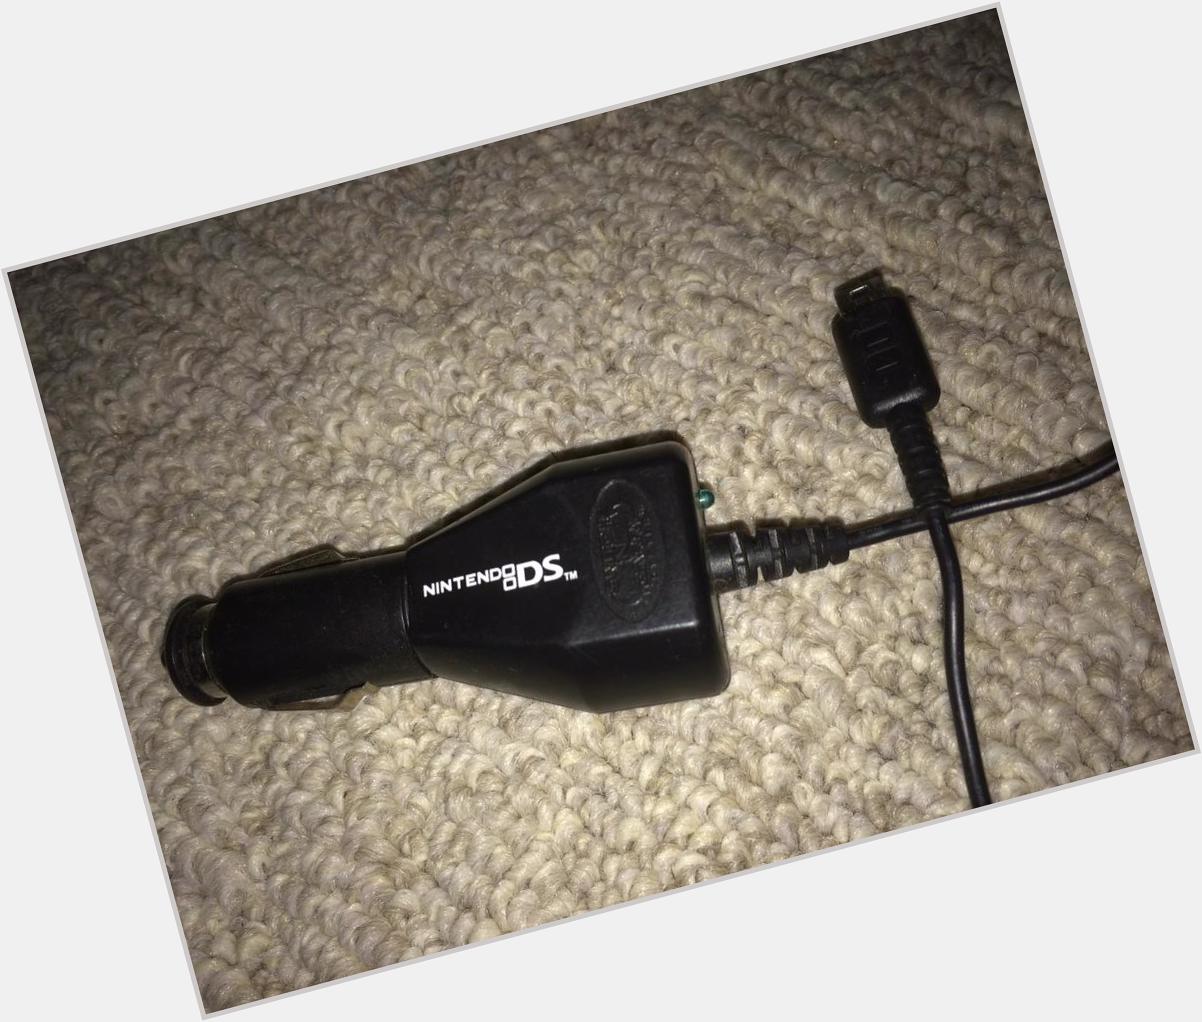 Happy birthday I got you a car charger for your Nintendo DS 